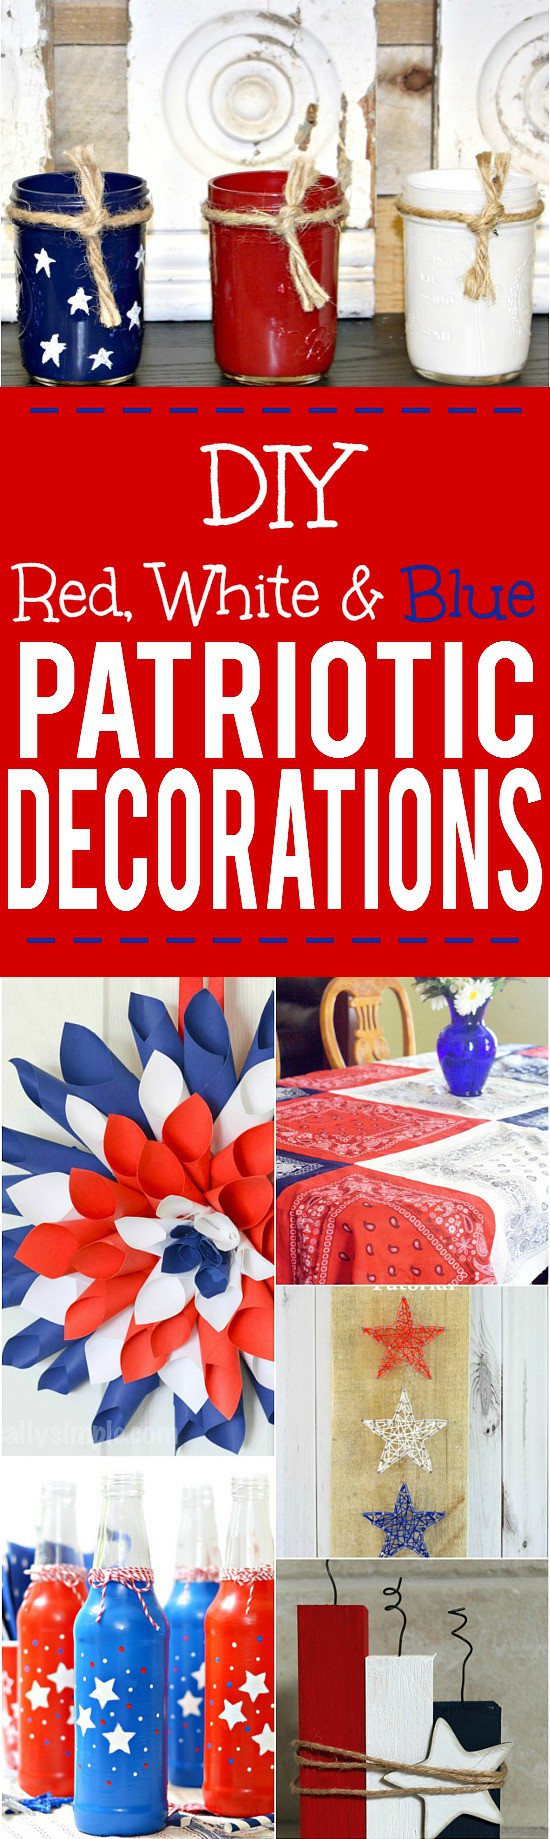 DIY Patriotic Decorations ideas that are frugal and easy! Make your home bright and festive this Summer with these Americana red, white, and blue DIY Patriotic Decorations ideas! Perfect home decor for Summer or all year long!  Oh, I love these! So festive and cute for Summer. Plus cheaper to make it yourself!